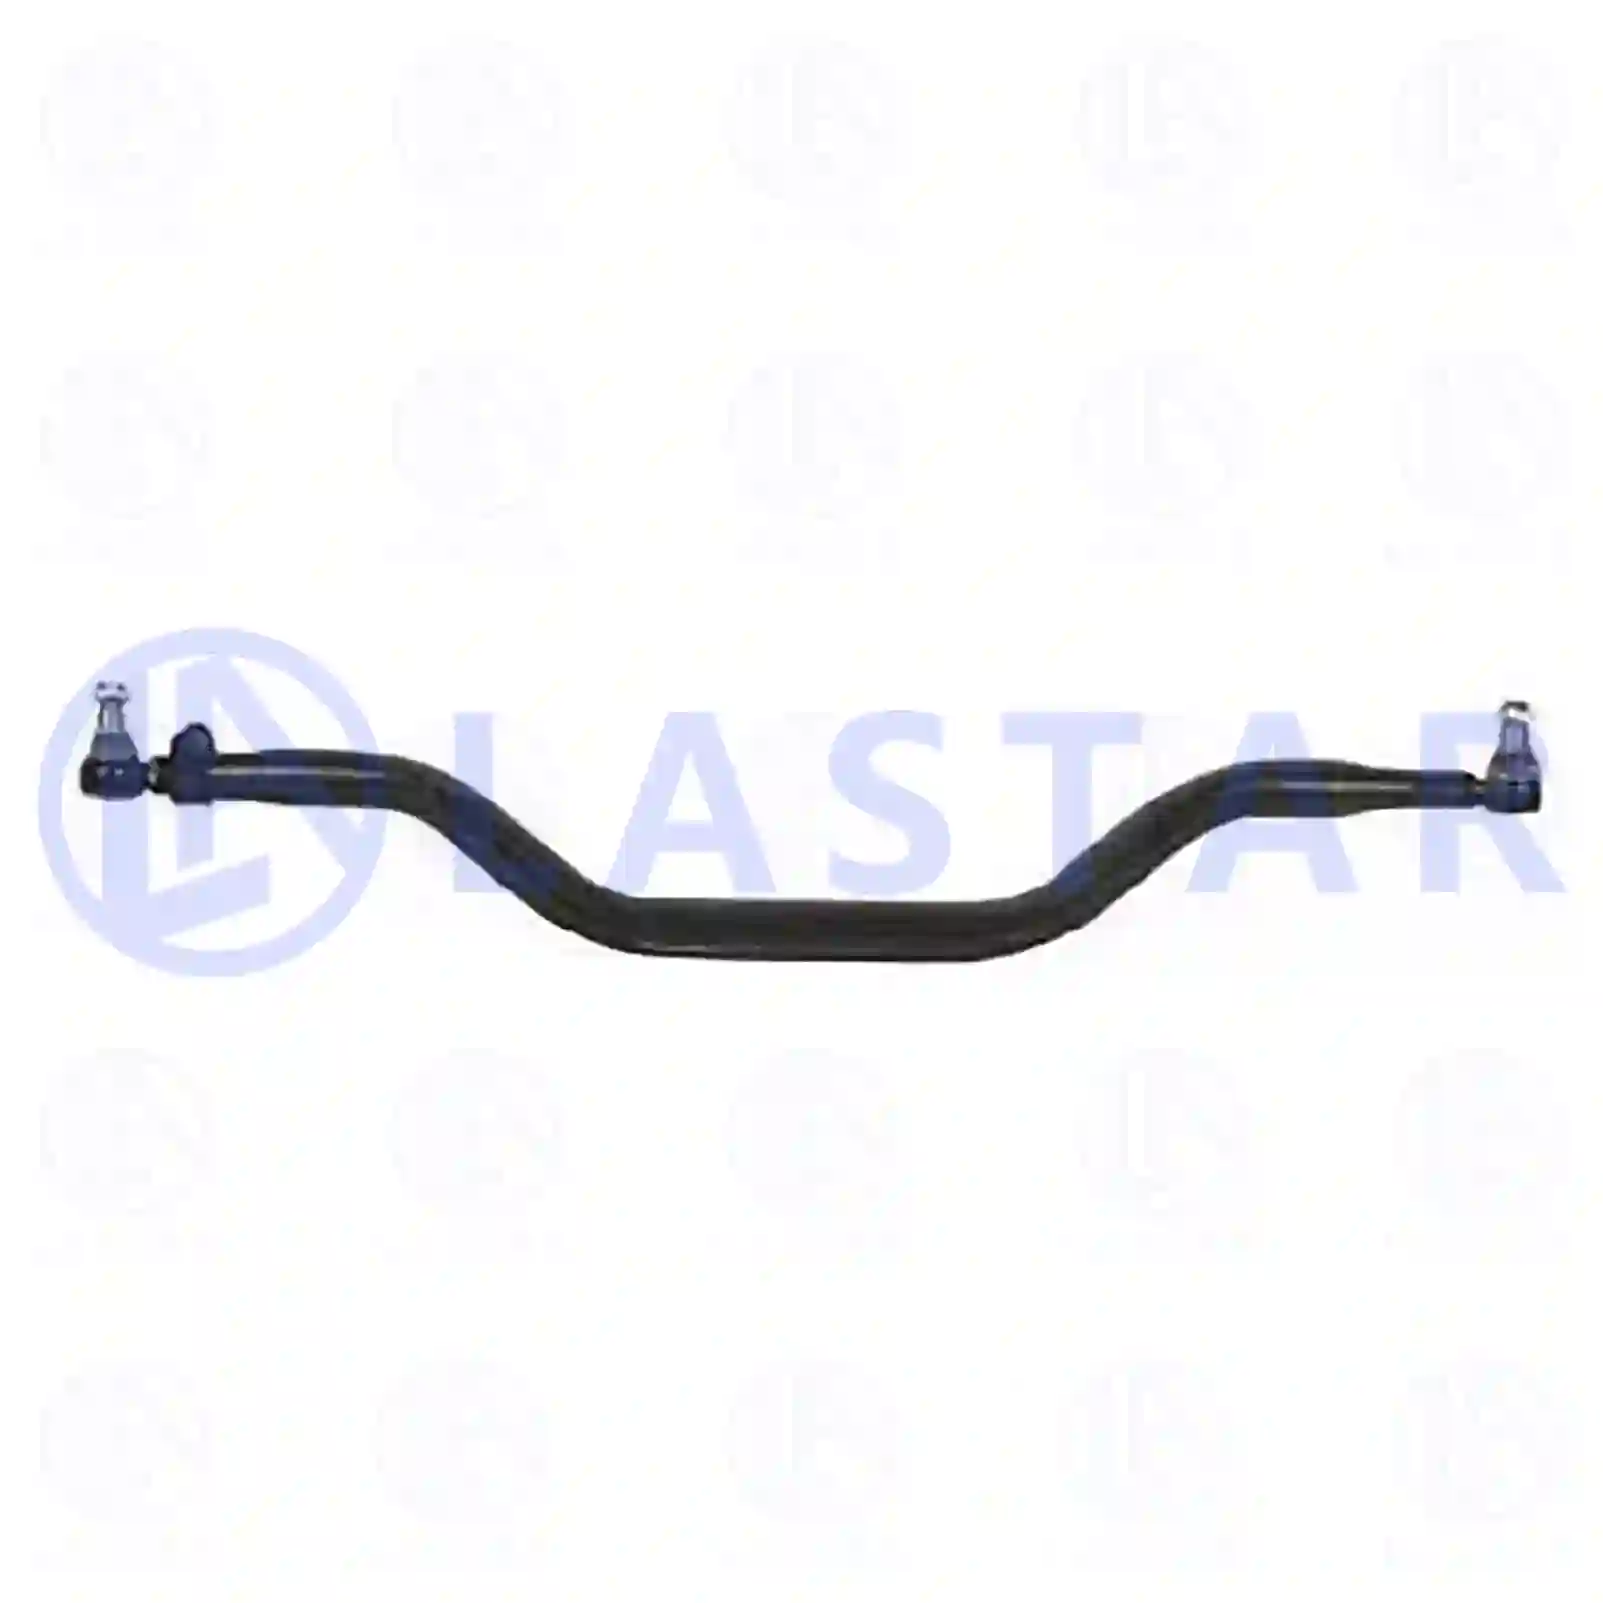 Track rod, 77730358, 81467116801, 81467116864, 81467116865, 81467116869 ||  77730358 Lastar Spare Part | Truck Spare Parts, Auotomotive Spare Parts Track rod, 77730358, 81467116801, 81467116864, 81467116865, 81467116869 ||  77730358 Lastar Spare Part | Truck Spare Parts, Auotomotive Spare Parts